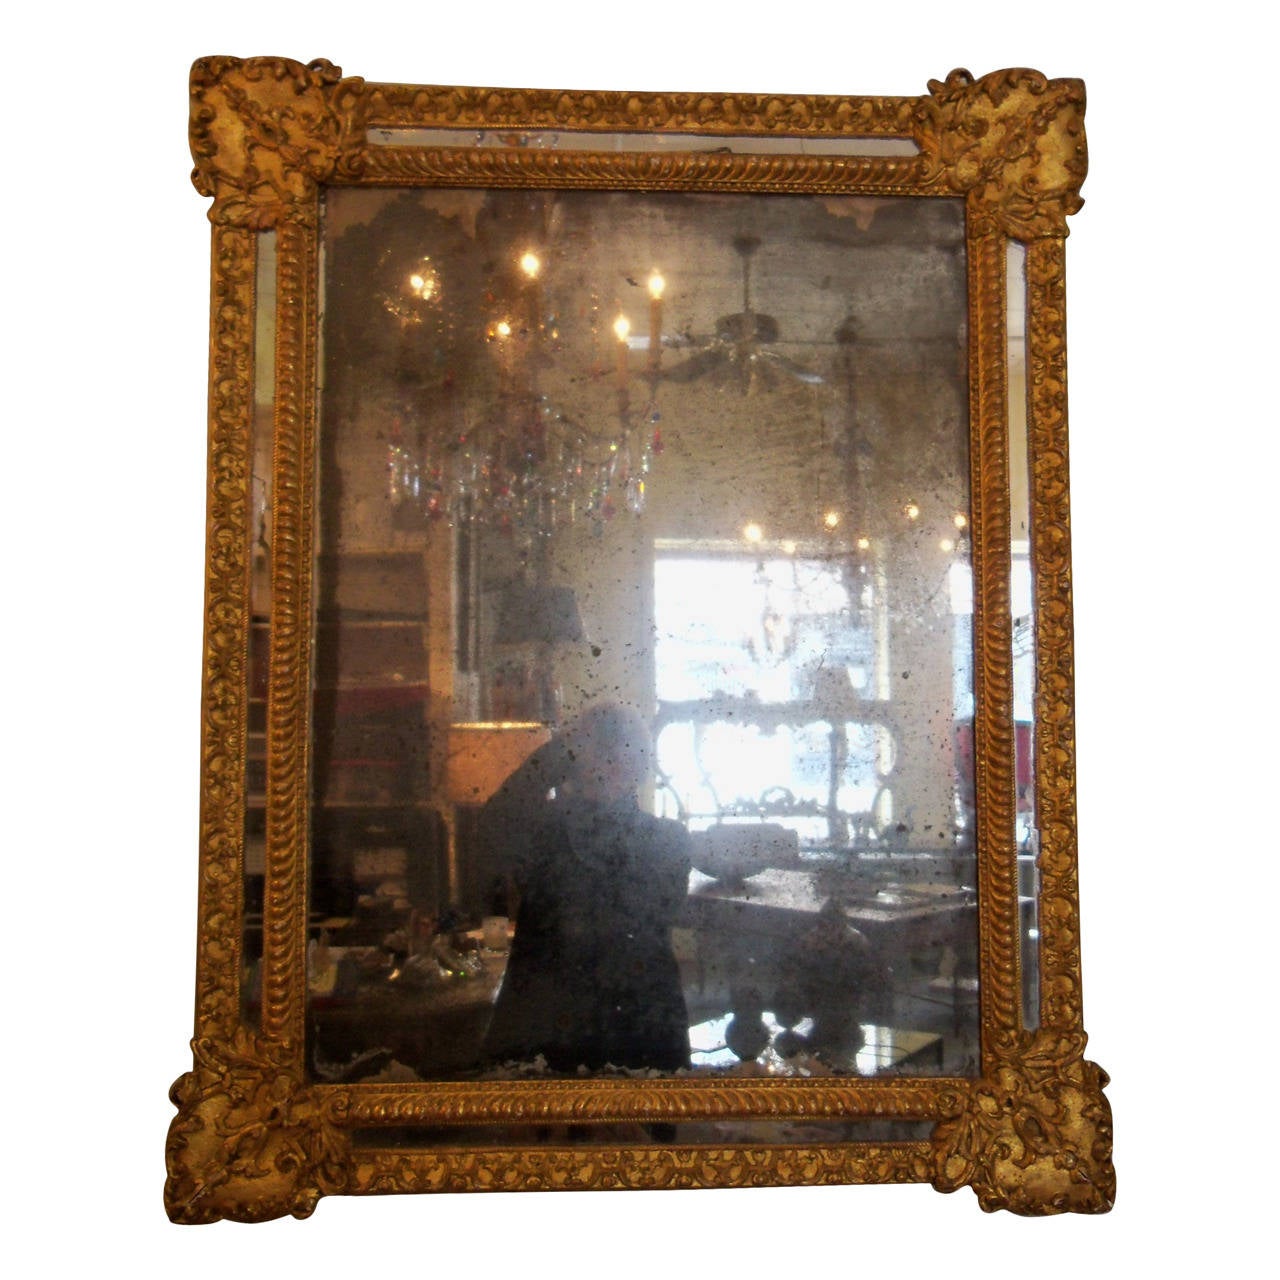 Graceful and lovely Italian early 19thc  rectangular mirror.  Gentle curves and foliate forms  set off the double wood frames which are embellished with gesso and gilt.